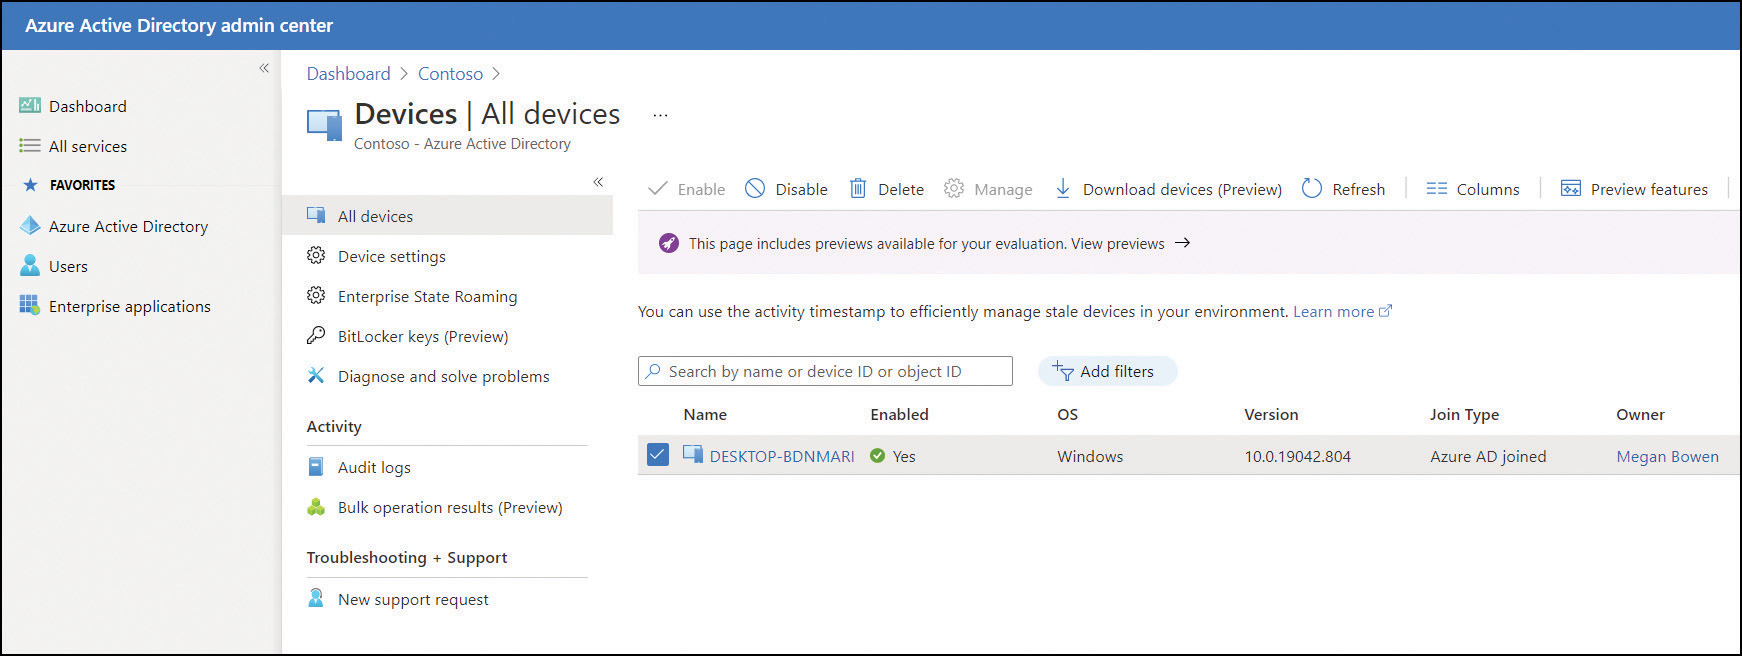 A screenshot shows the Devices page within the Contoso Azure Active Directory. The page is split into two panes. The left pane lists the Manage options with All Devices highlighted. In the center pane, a device is selected, and the menu options shown above the device include Columns, Refresh, Enable (unavailable), Disable, Delete, and Manage (unavailable).